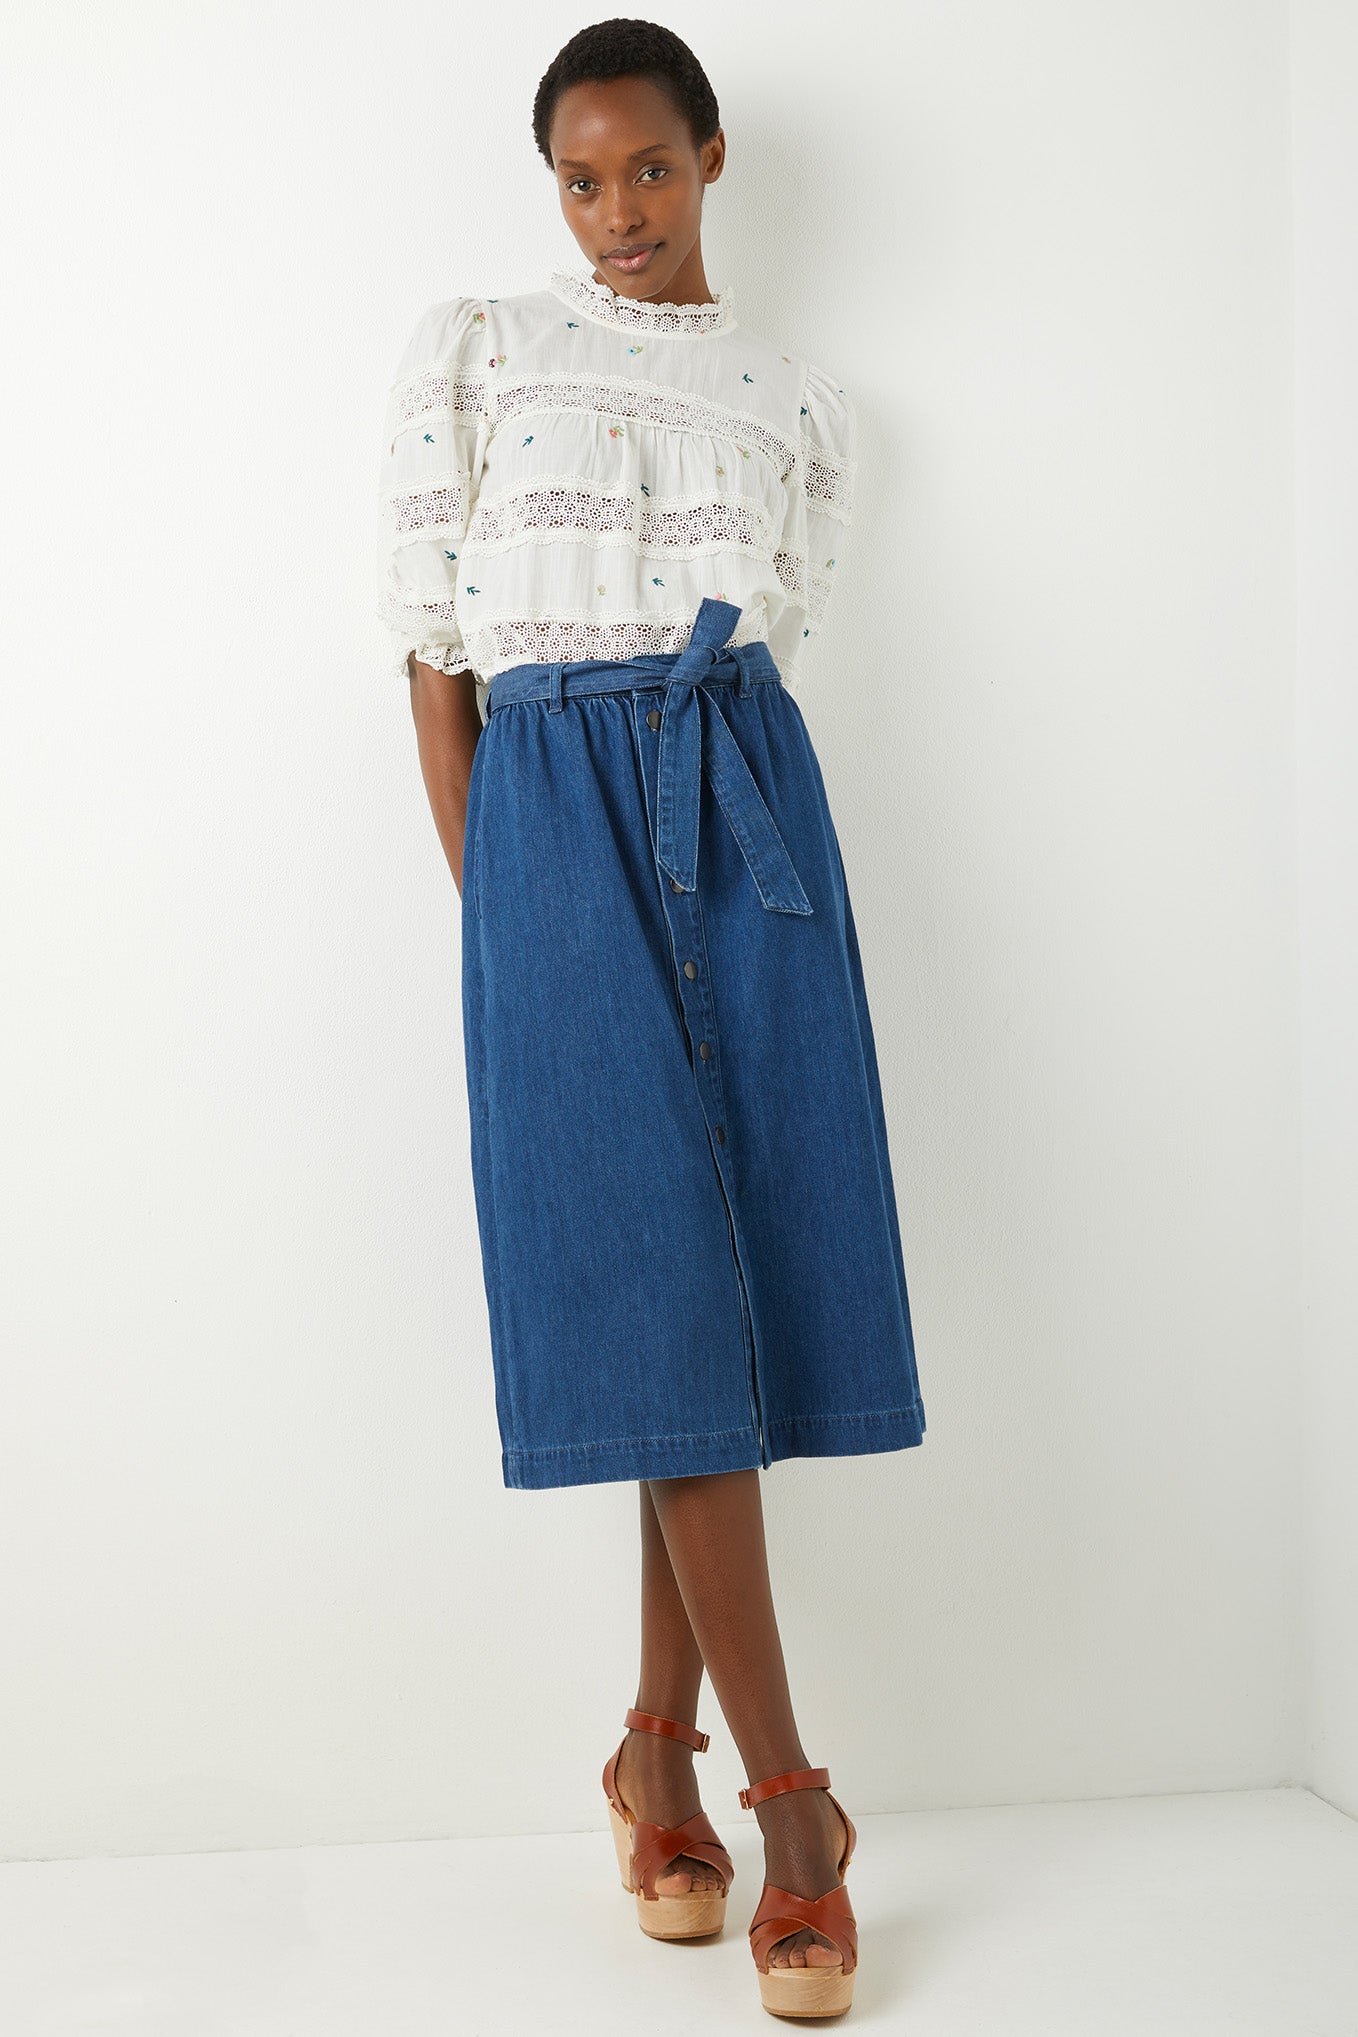 V by Very Button Front A Line Denim Skirt - Dark Wash | very.co.uk